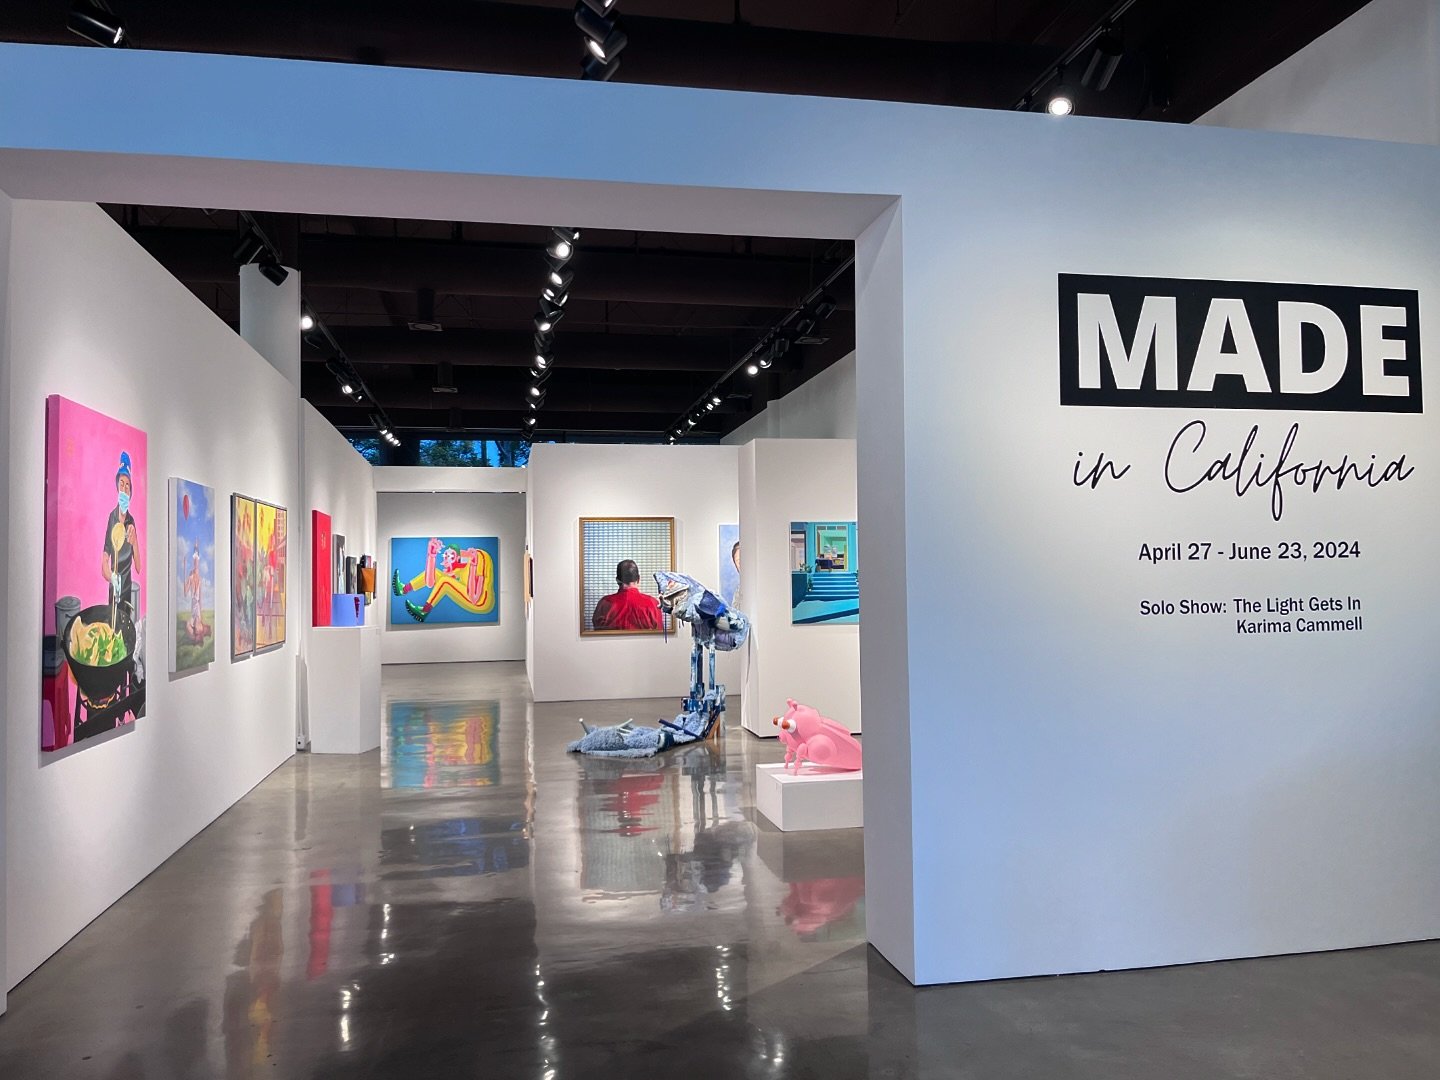 It&rsquo;s about that time! ⏰ Join us for the opening of #MadeinCalifornia tonight! ☀️

Opening reception is free to the public and will be 5pm-7pm 🎉  Come by and see some amazing artists!! ✨ Accompanied with snacks, light refreshments, music and go